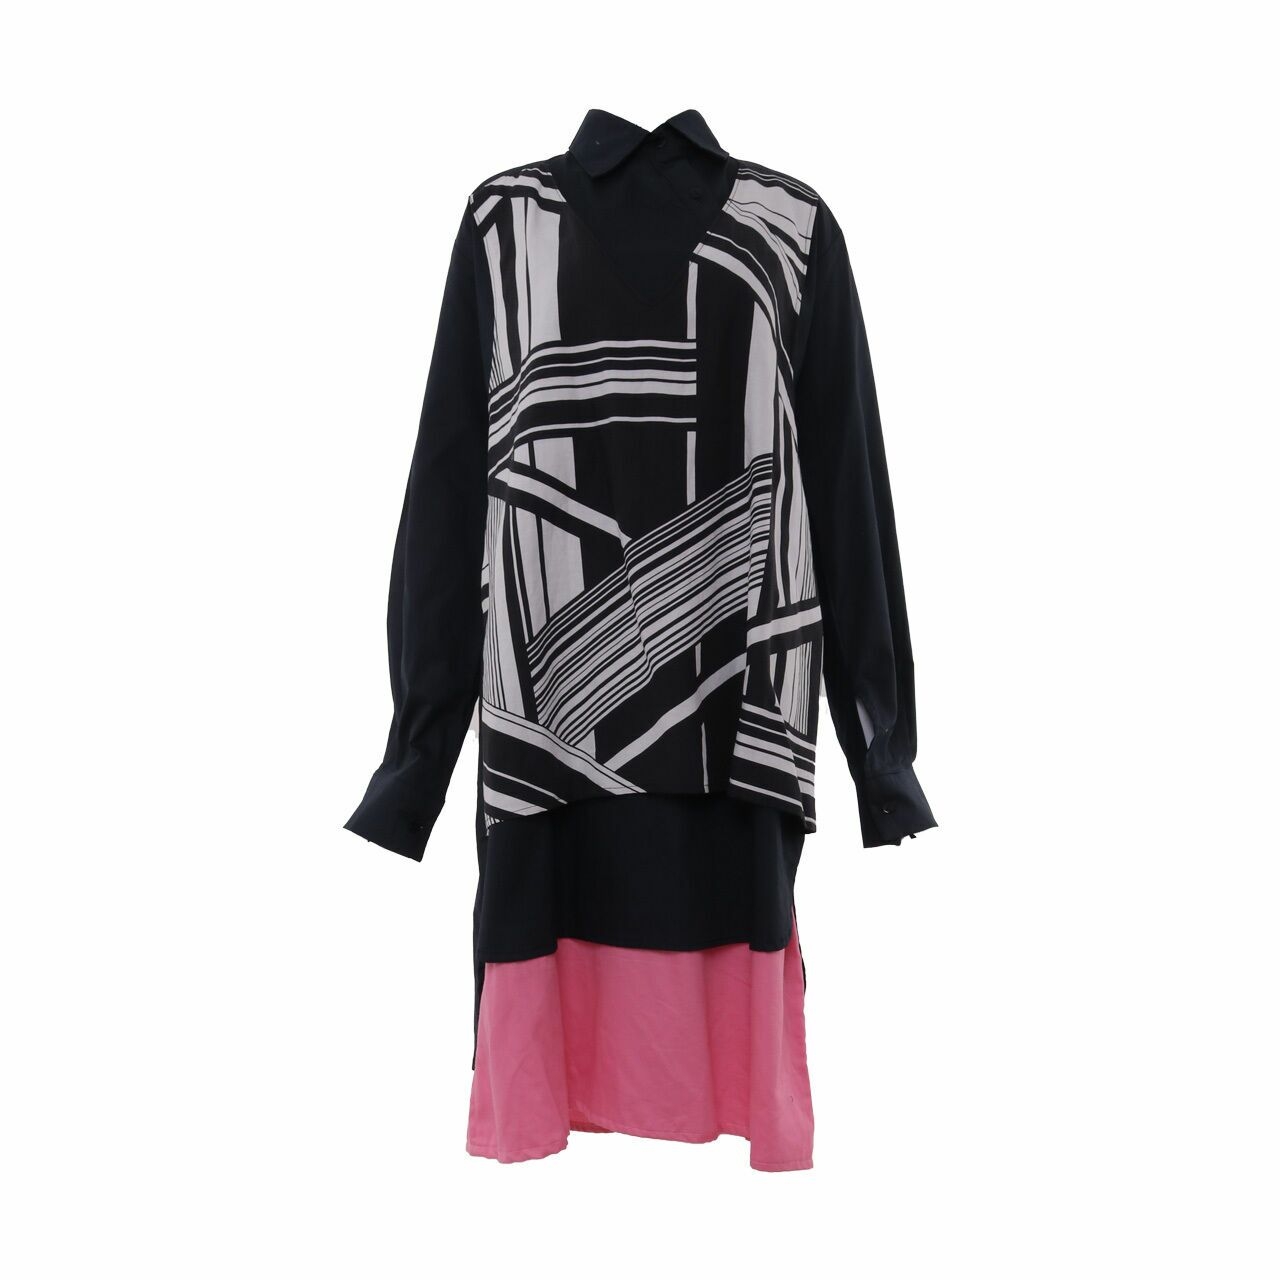 Nonss Navy/Black/White/Pink Tunic Blouse